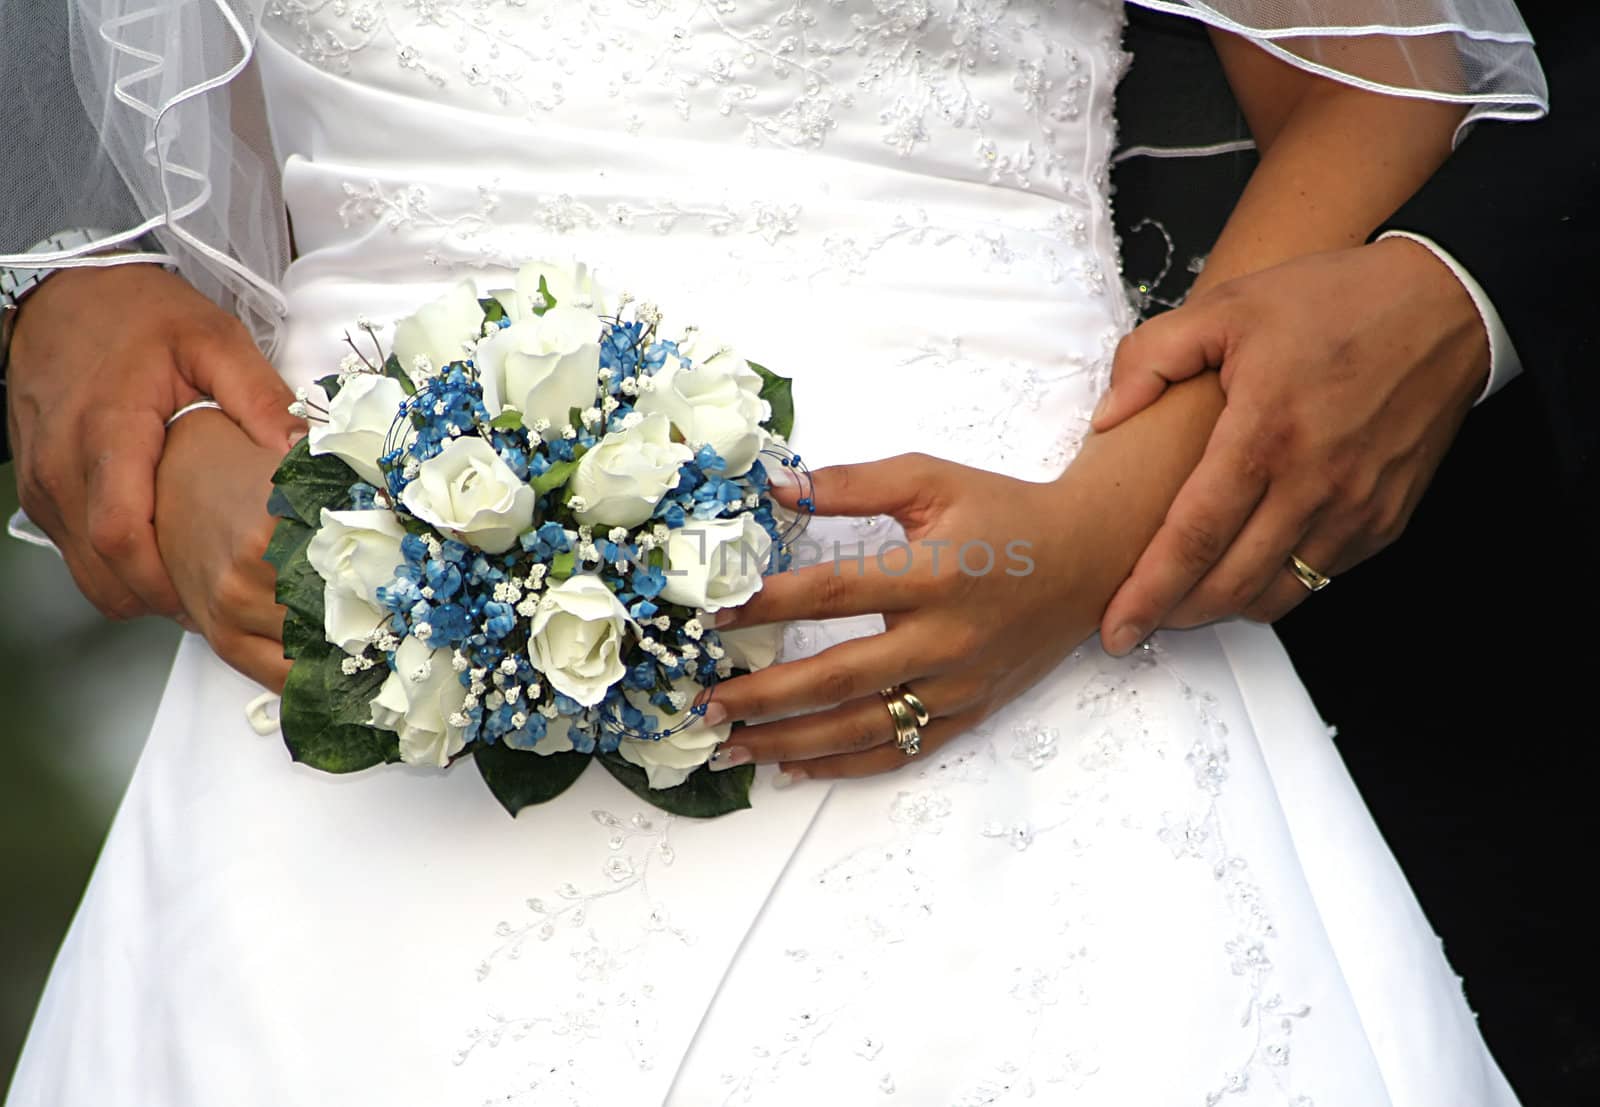 Bride and Grooms hands and bouquet on their wedding day

